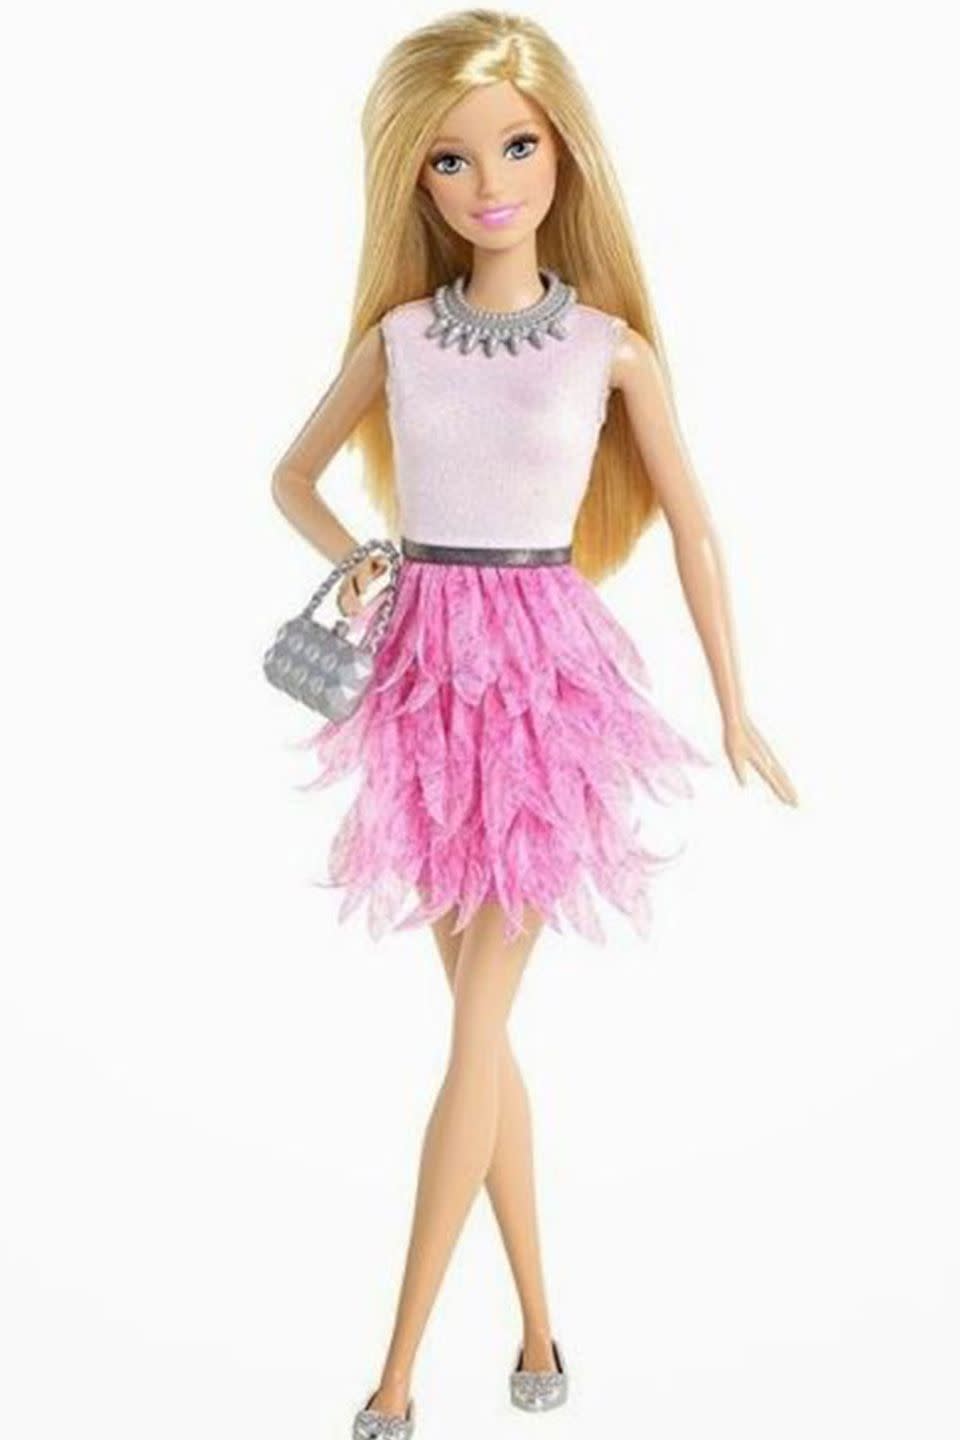 Doll, Clothing, Barbie, Pink, Toy, Dress, Fashion, Costume, Blond, Mannequin, 